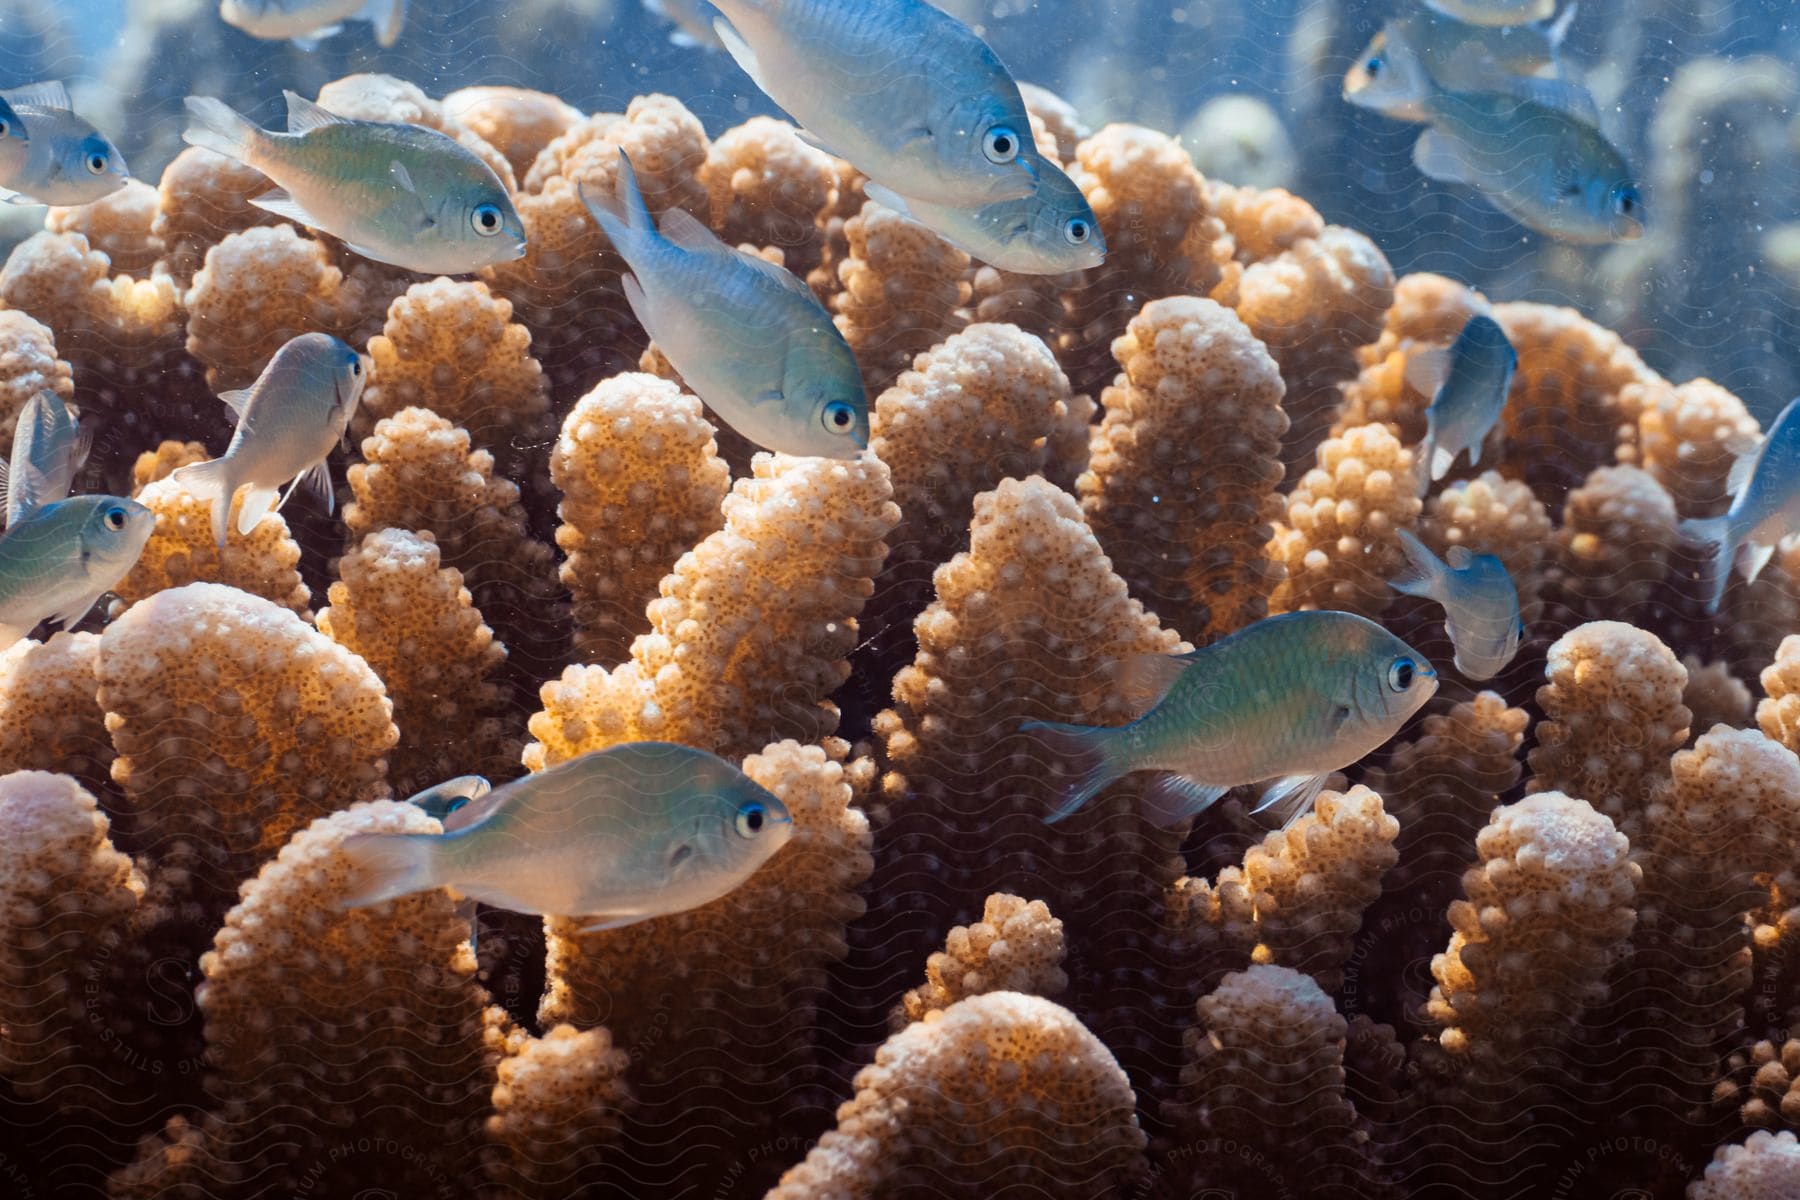 A group of fish swimming among coral in the sea